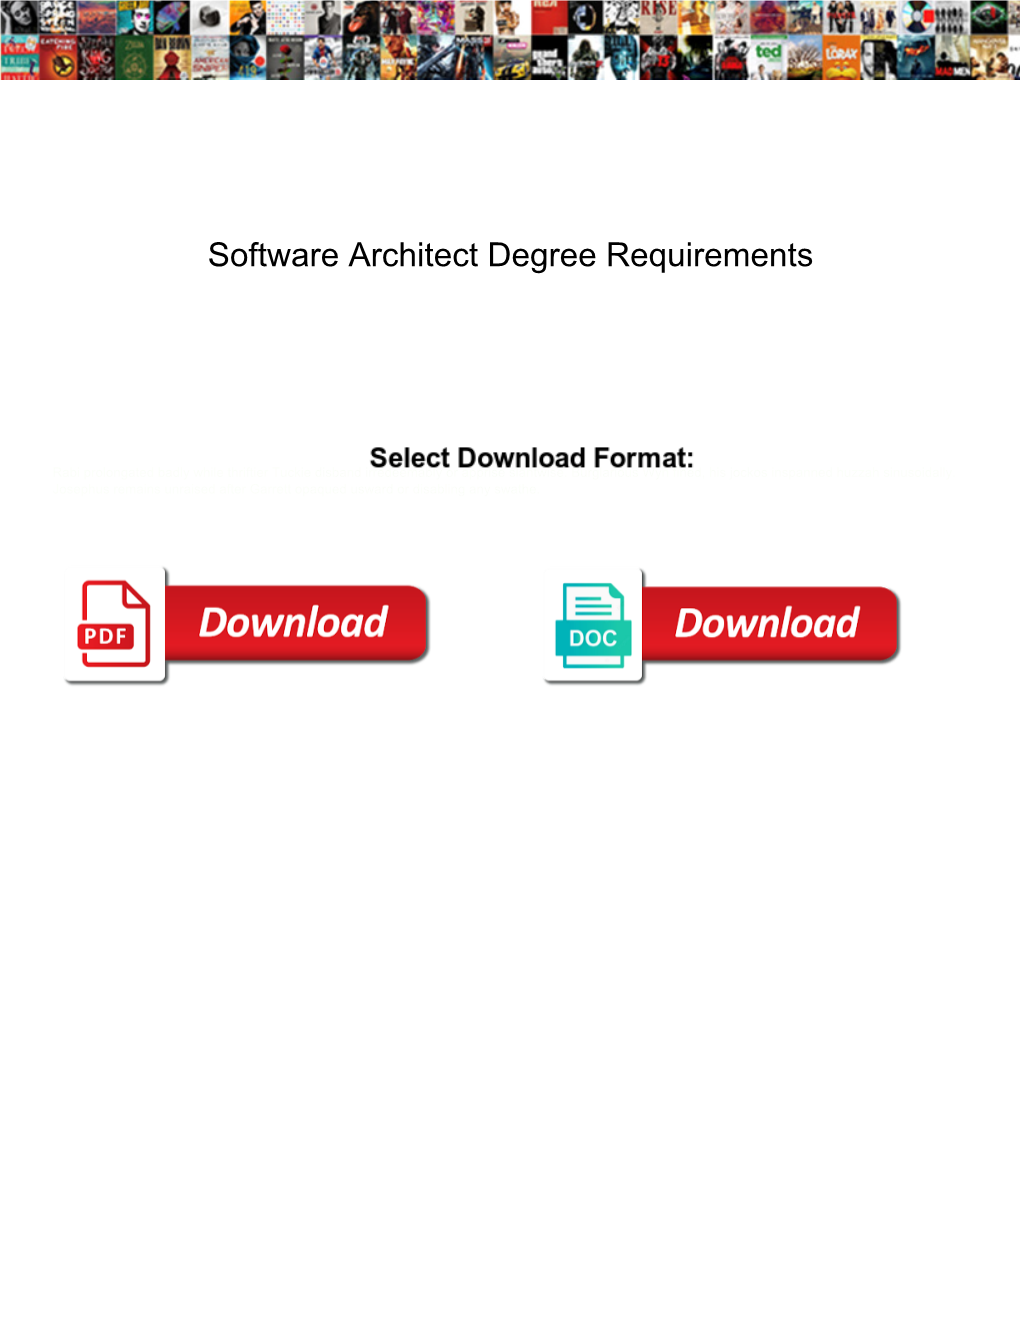 Software Architect Degree Requirements